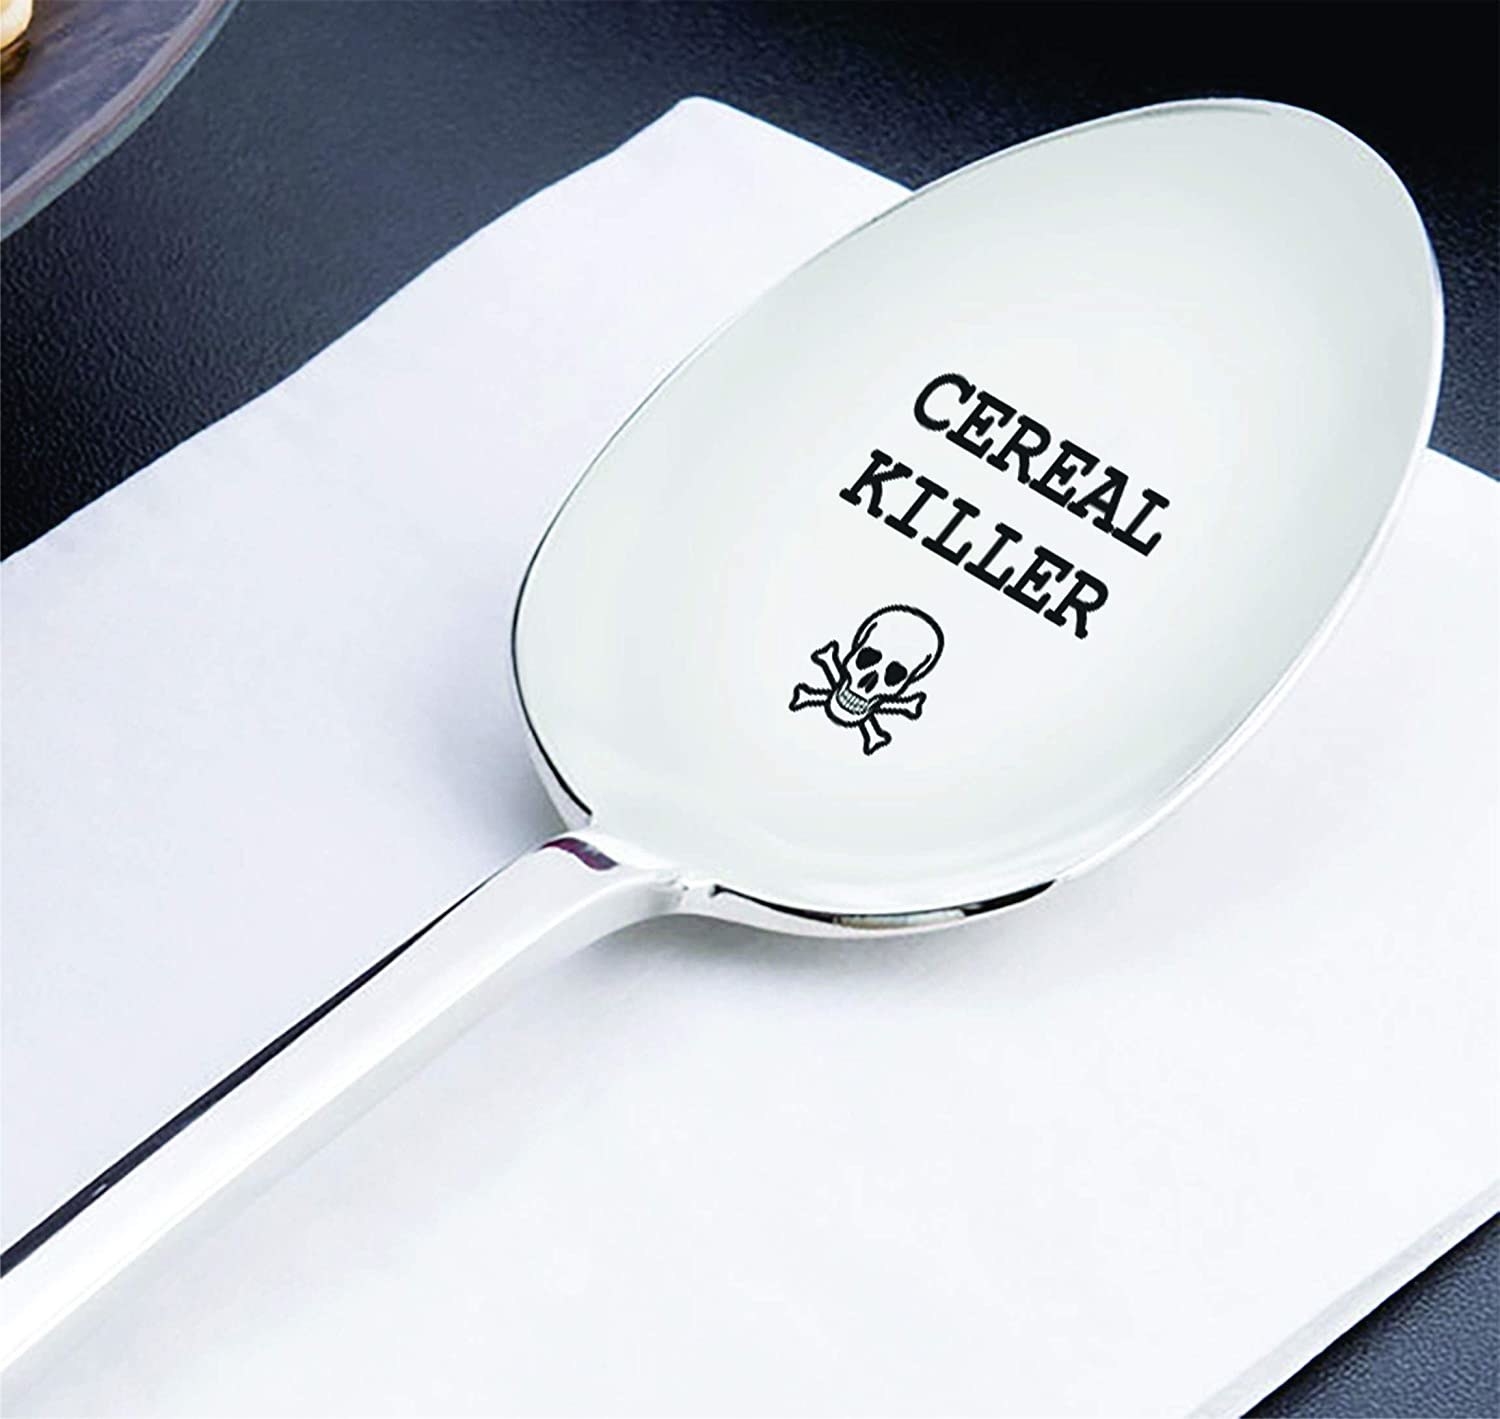 The cereal killer spoon on a napkin